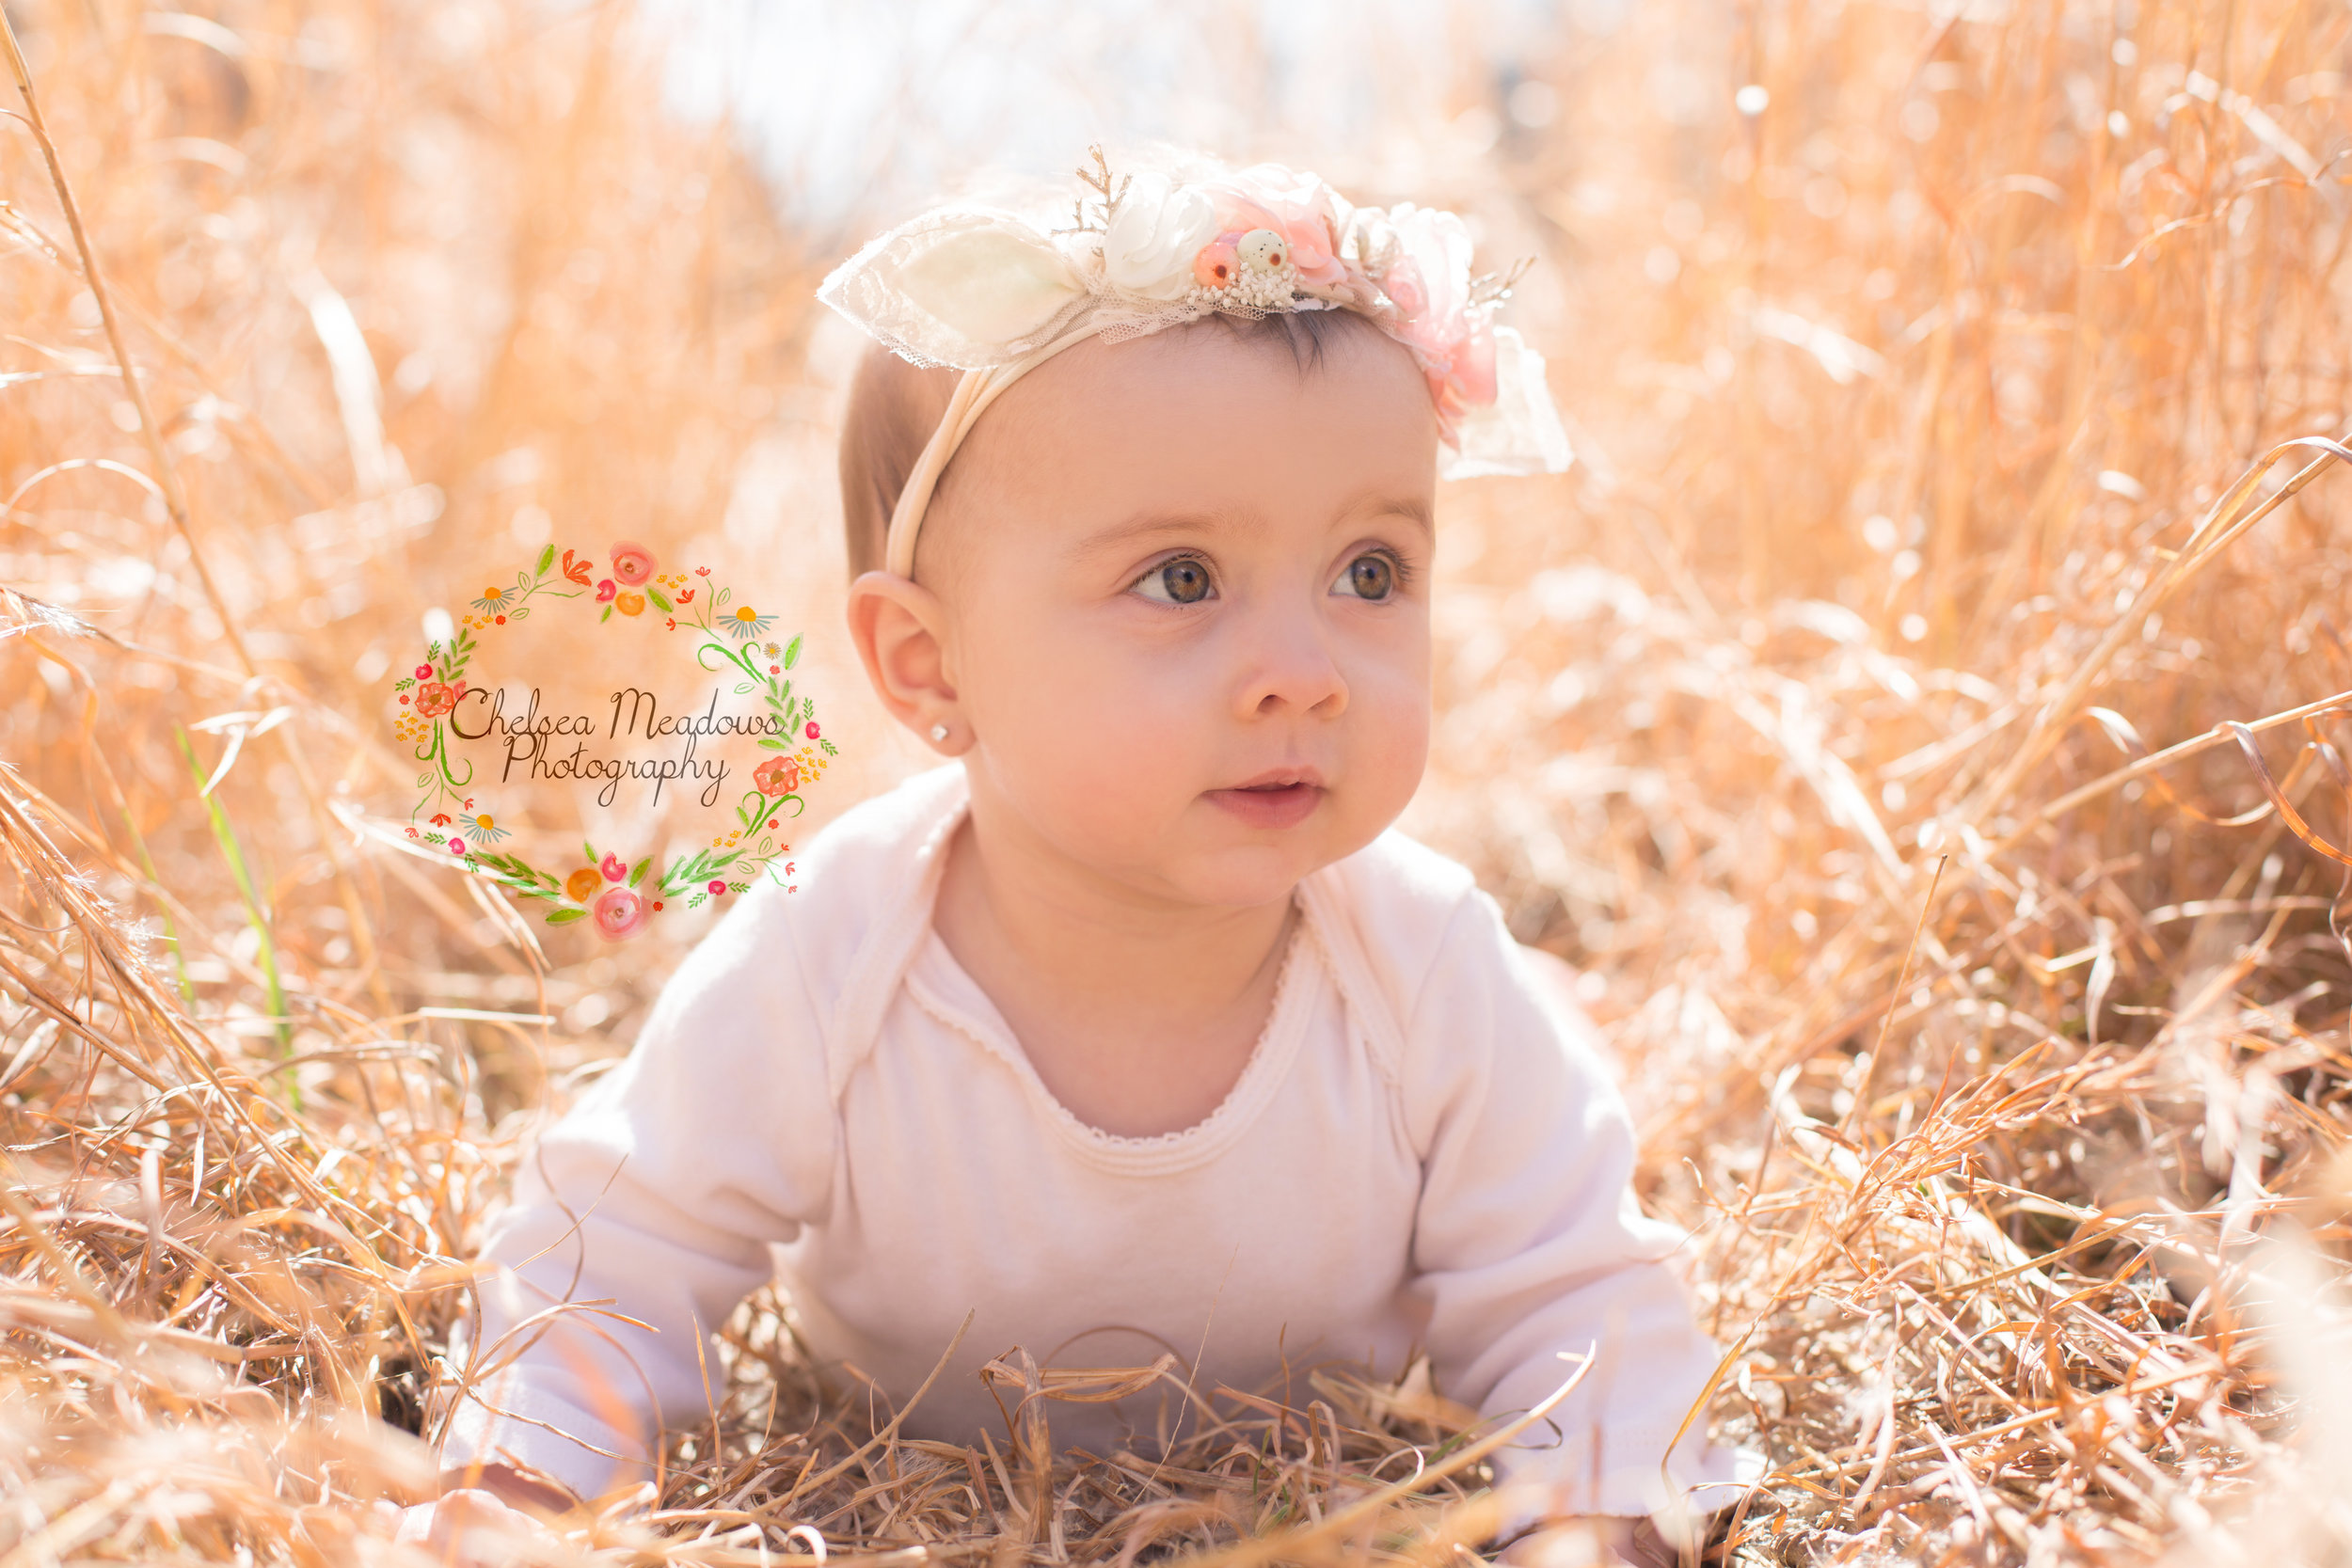 Ava's Sitting-Up-Session | A Girly Six-Month Photo Shoot | Baby photoshoot  girl, Baby boy photos, Baby photoshoot